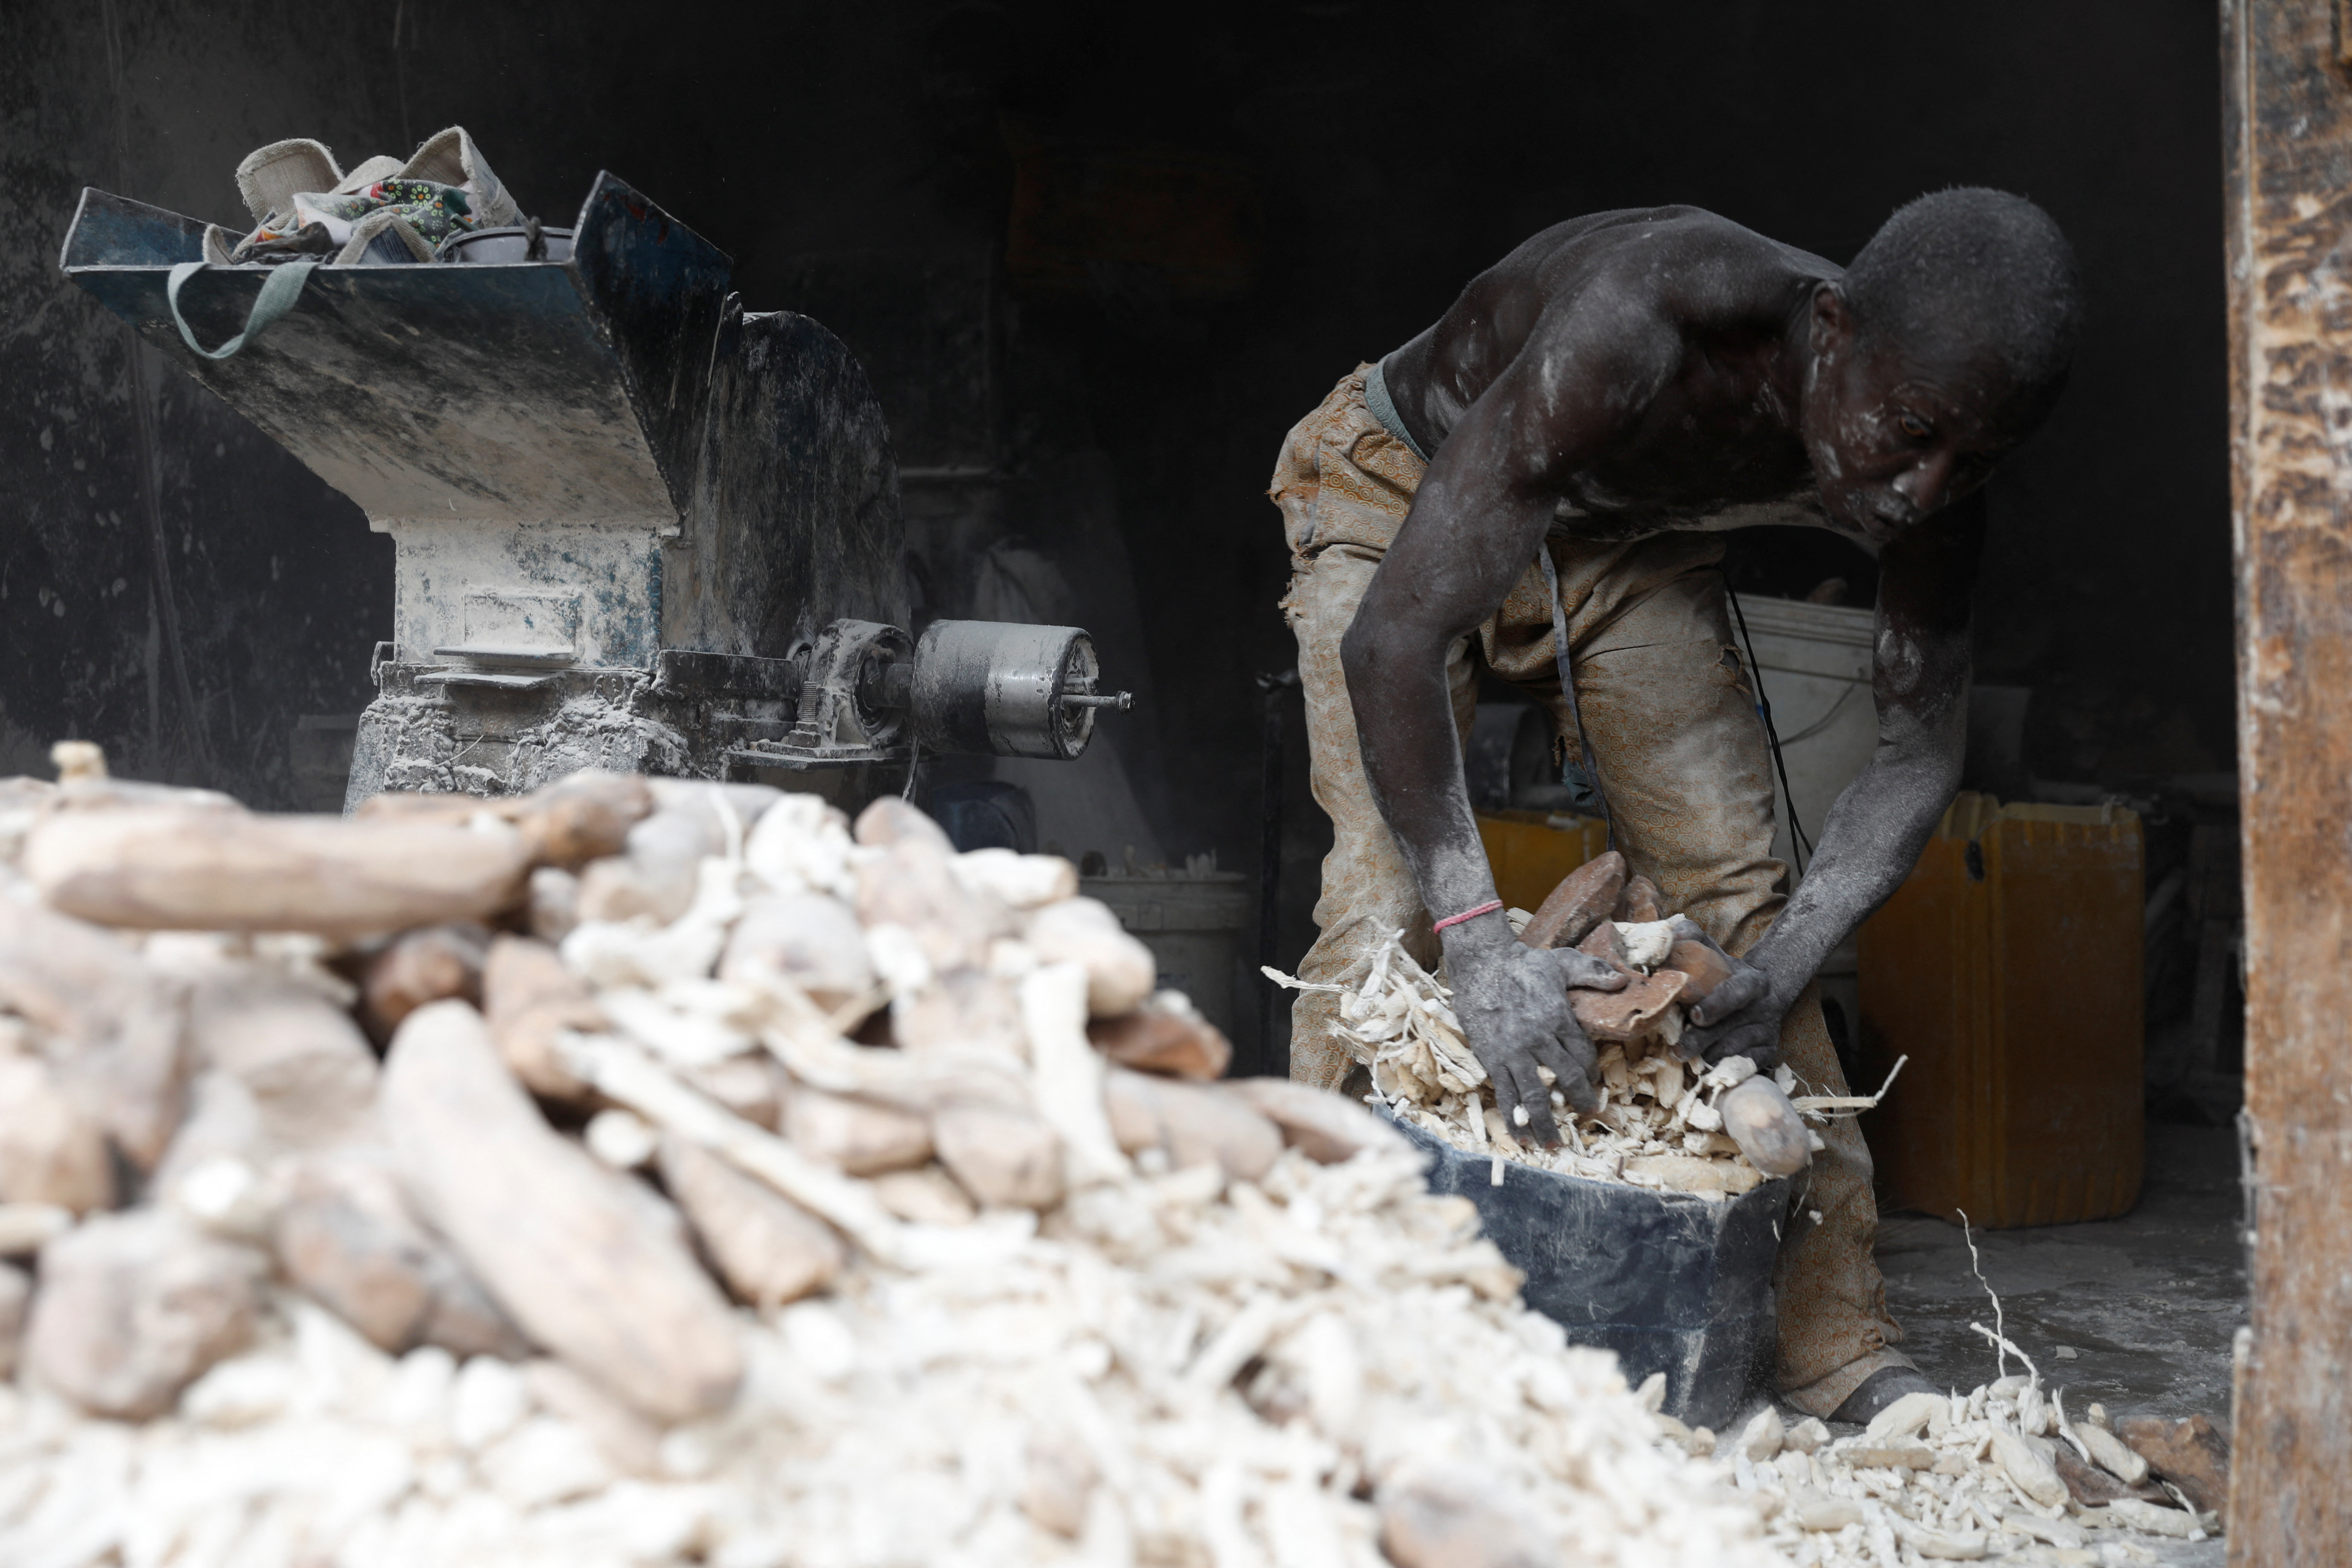 A man heaps dried yam slices as he prepares them for milling, to be processed into yam flour at Bodija market in Ibadan